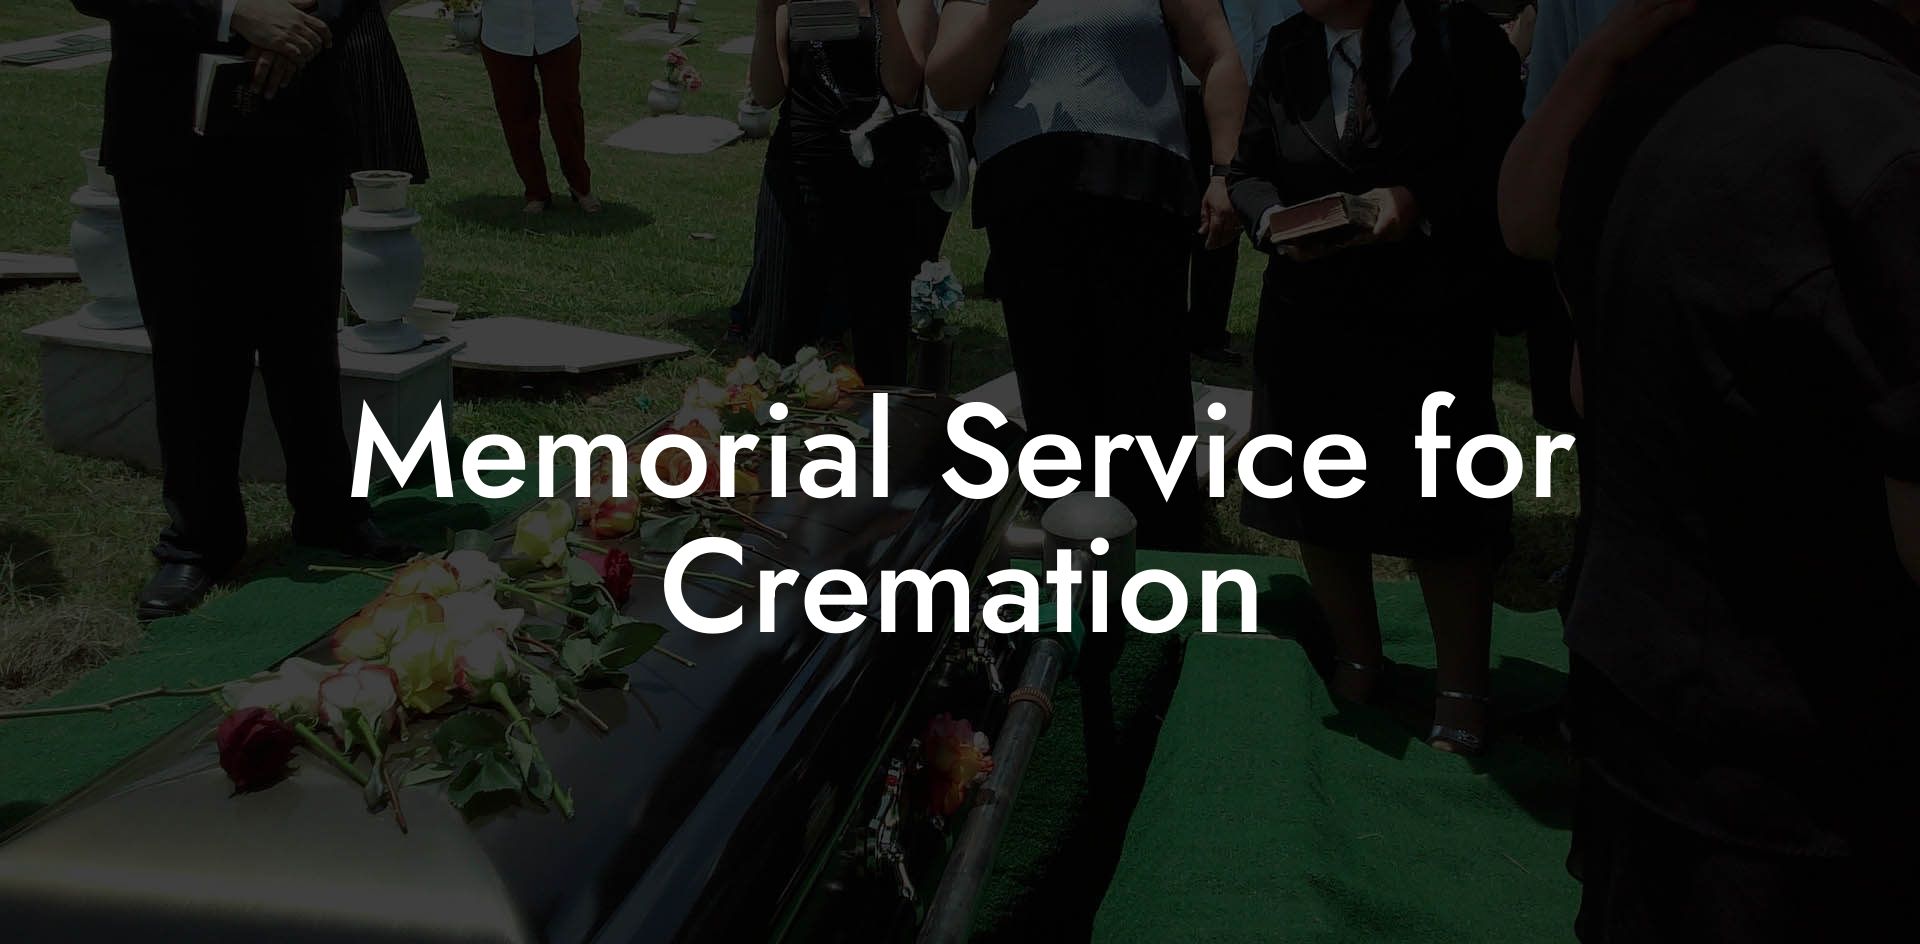 Memorial Service for Cremation